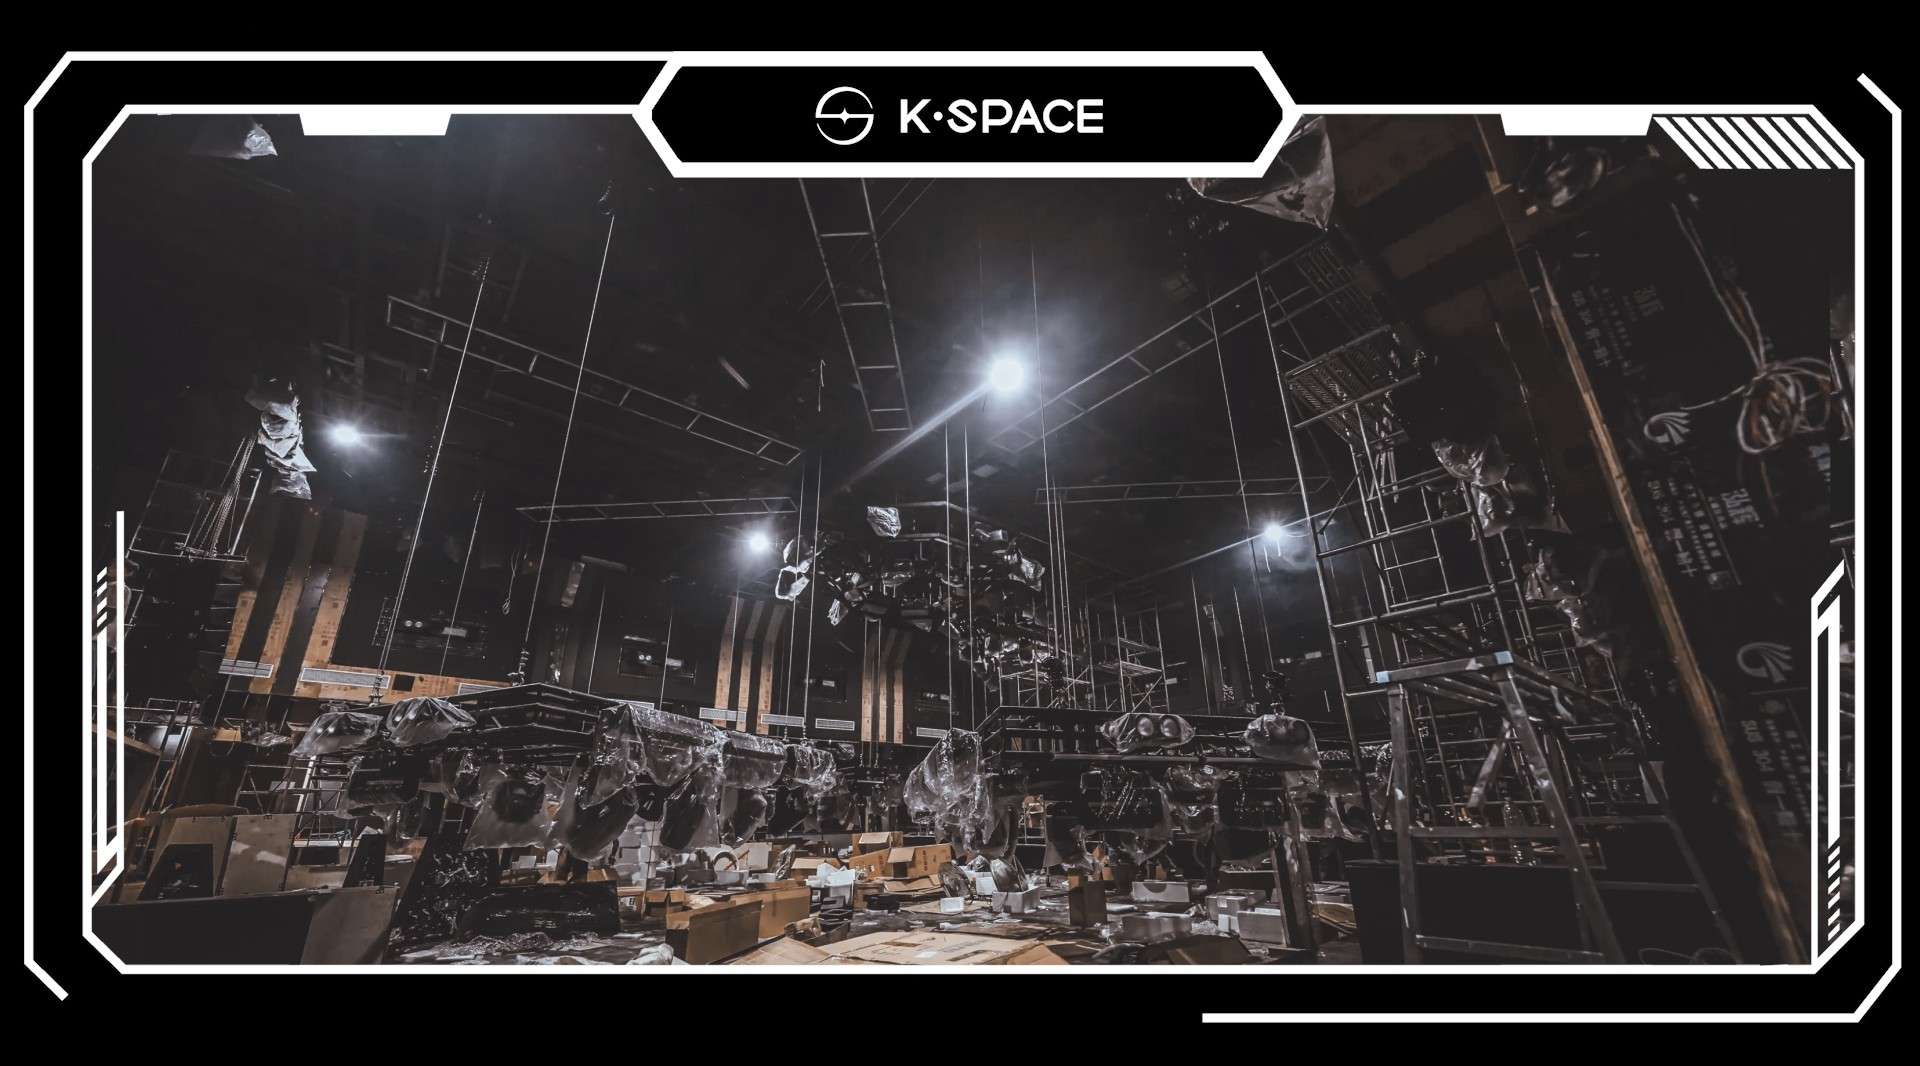 K-SPACE